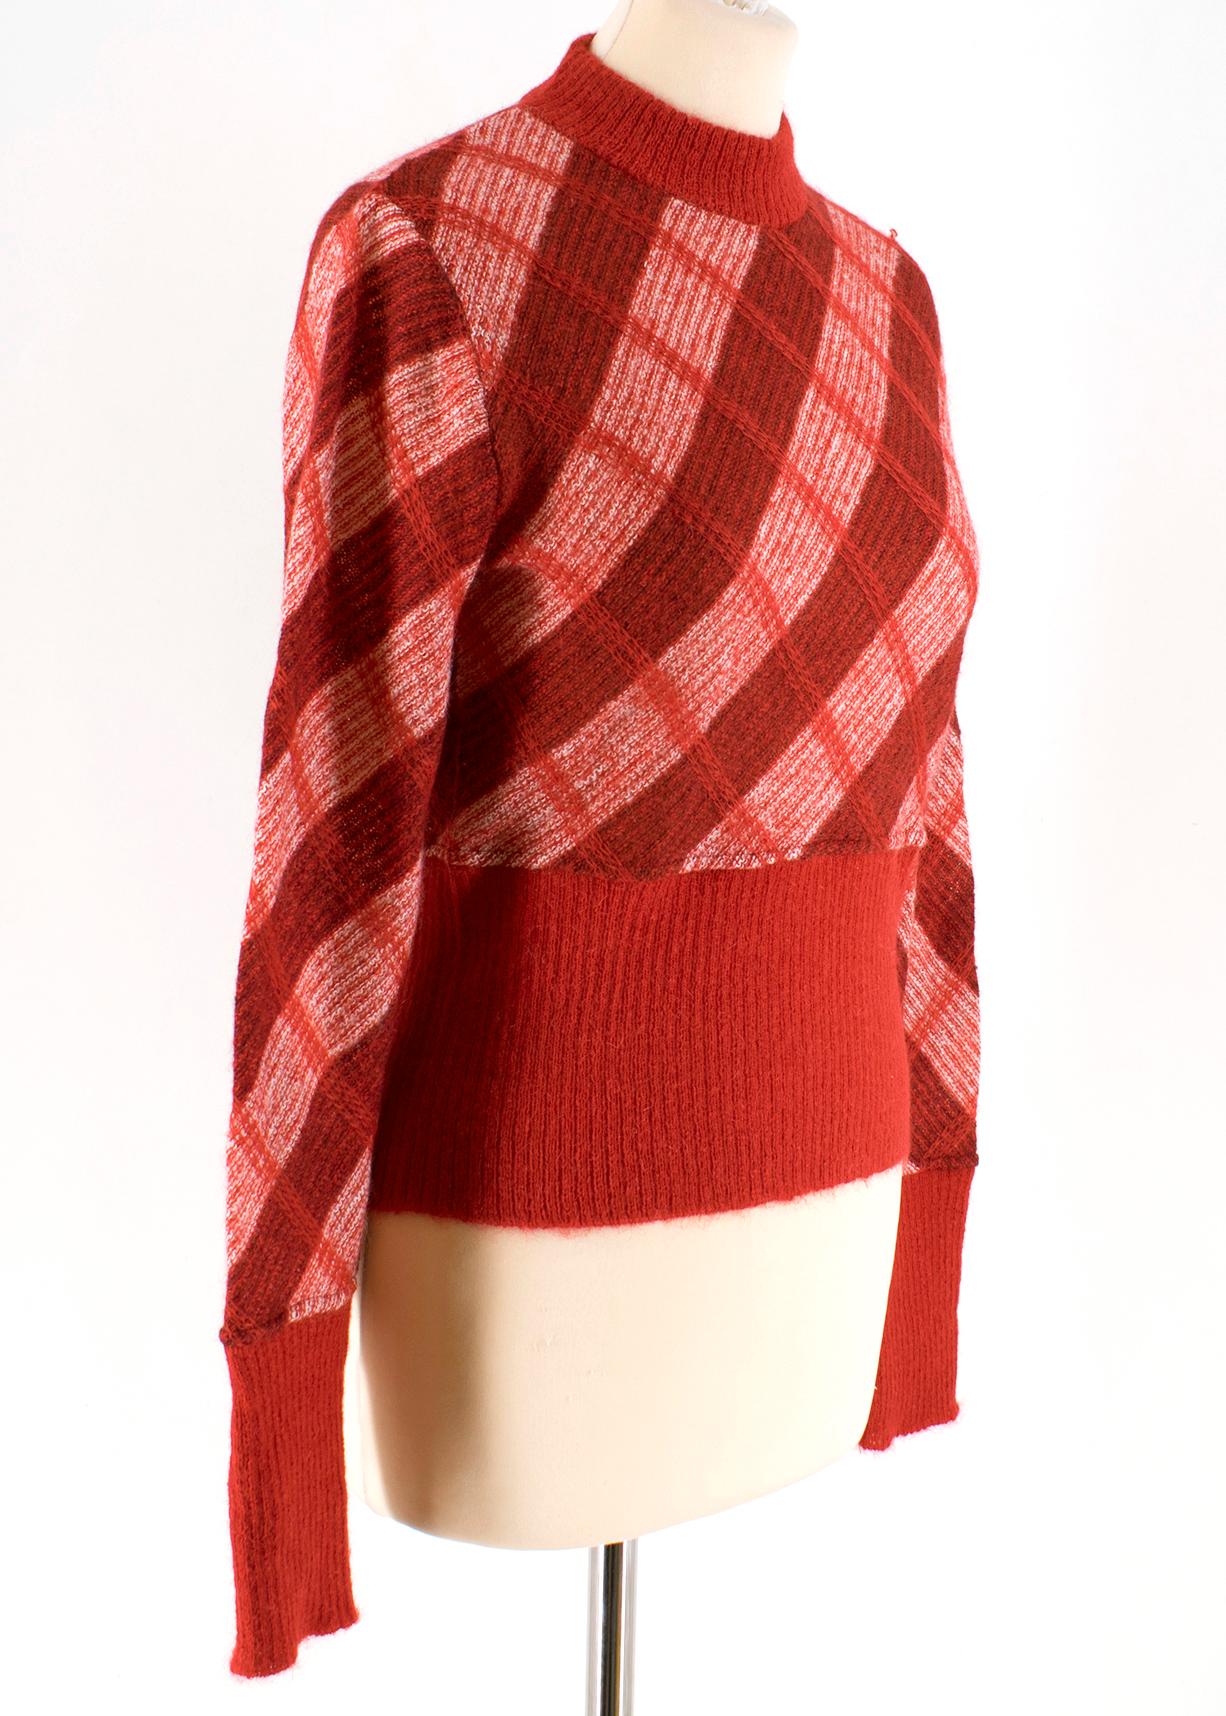 Miu Miu Red Check Mohair Crop Knit Sweater

- red mohair sweater
- check pattern
- crop length
- long sleeve
- unlined
- round neckline

Please note, these items are pre-owned and may show some signs of storage, even when unworn and unused. This is